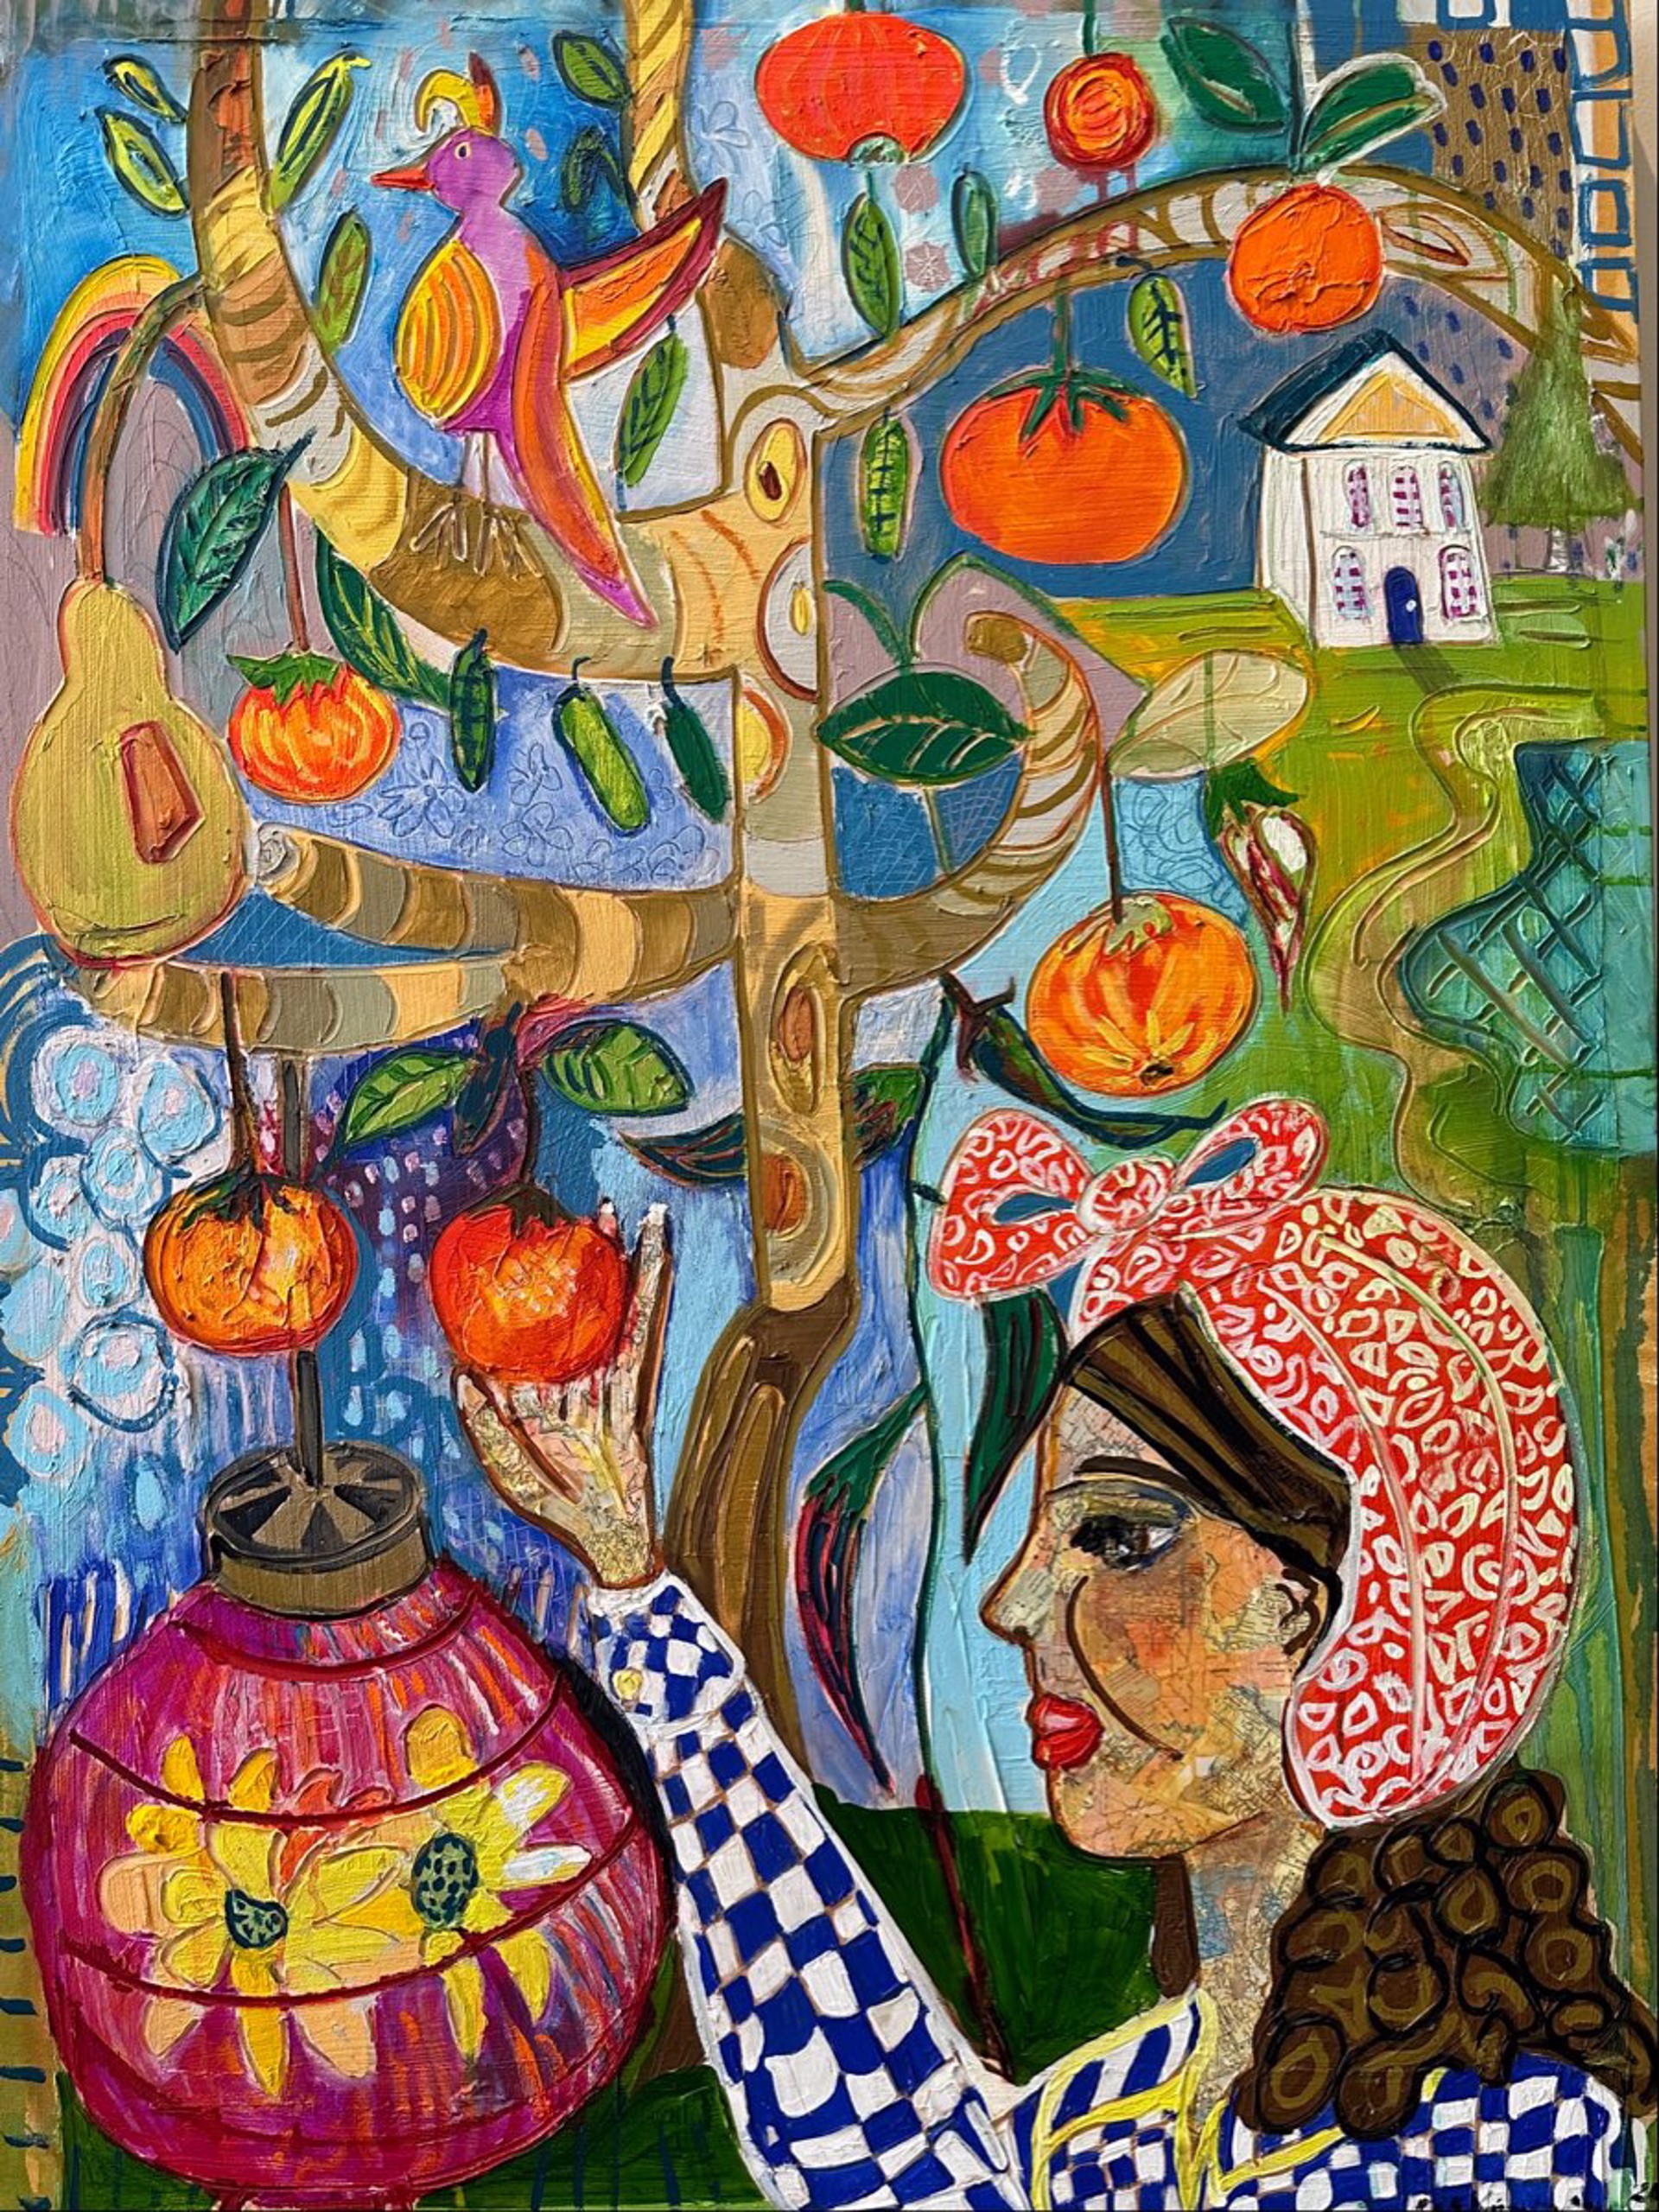 Persimmon Tree of Life by Mary Elizabeth Kimbrough